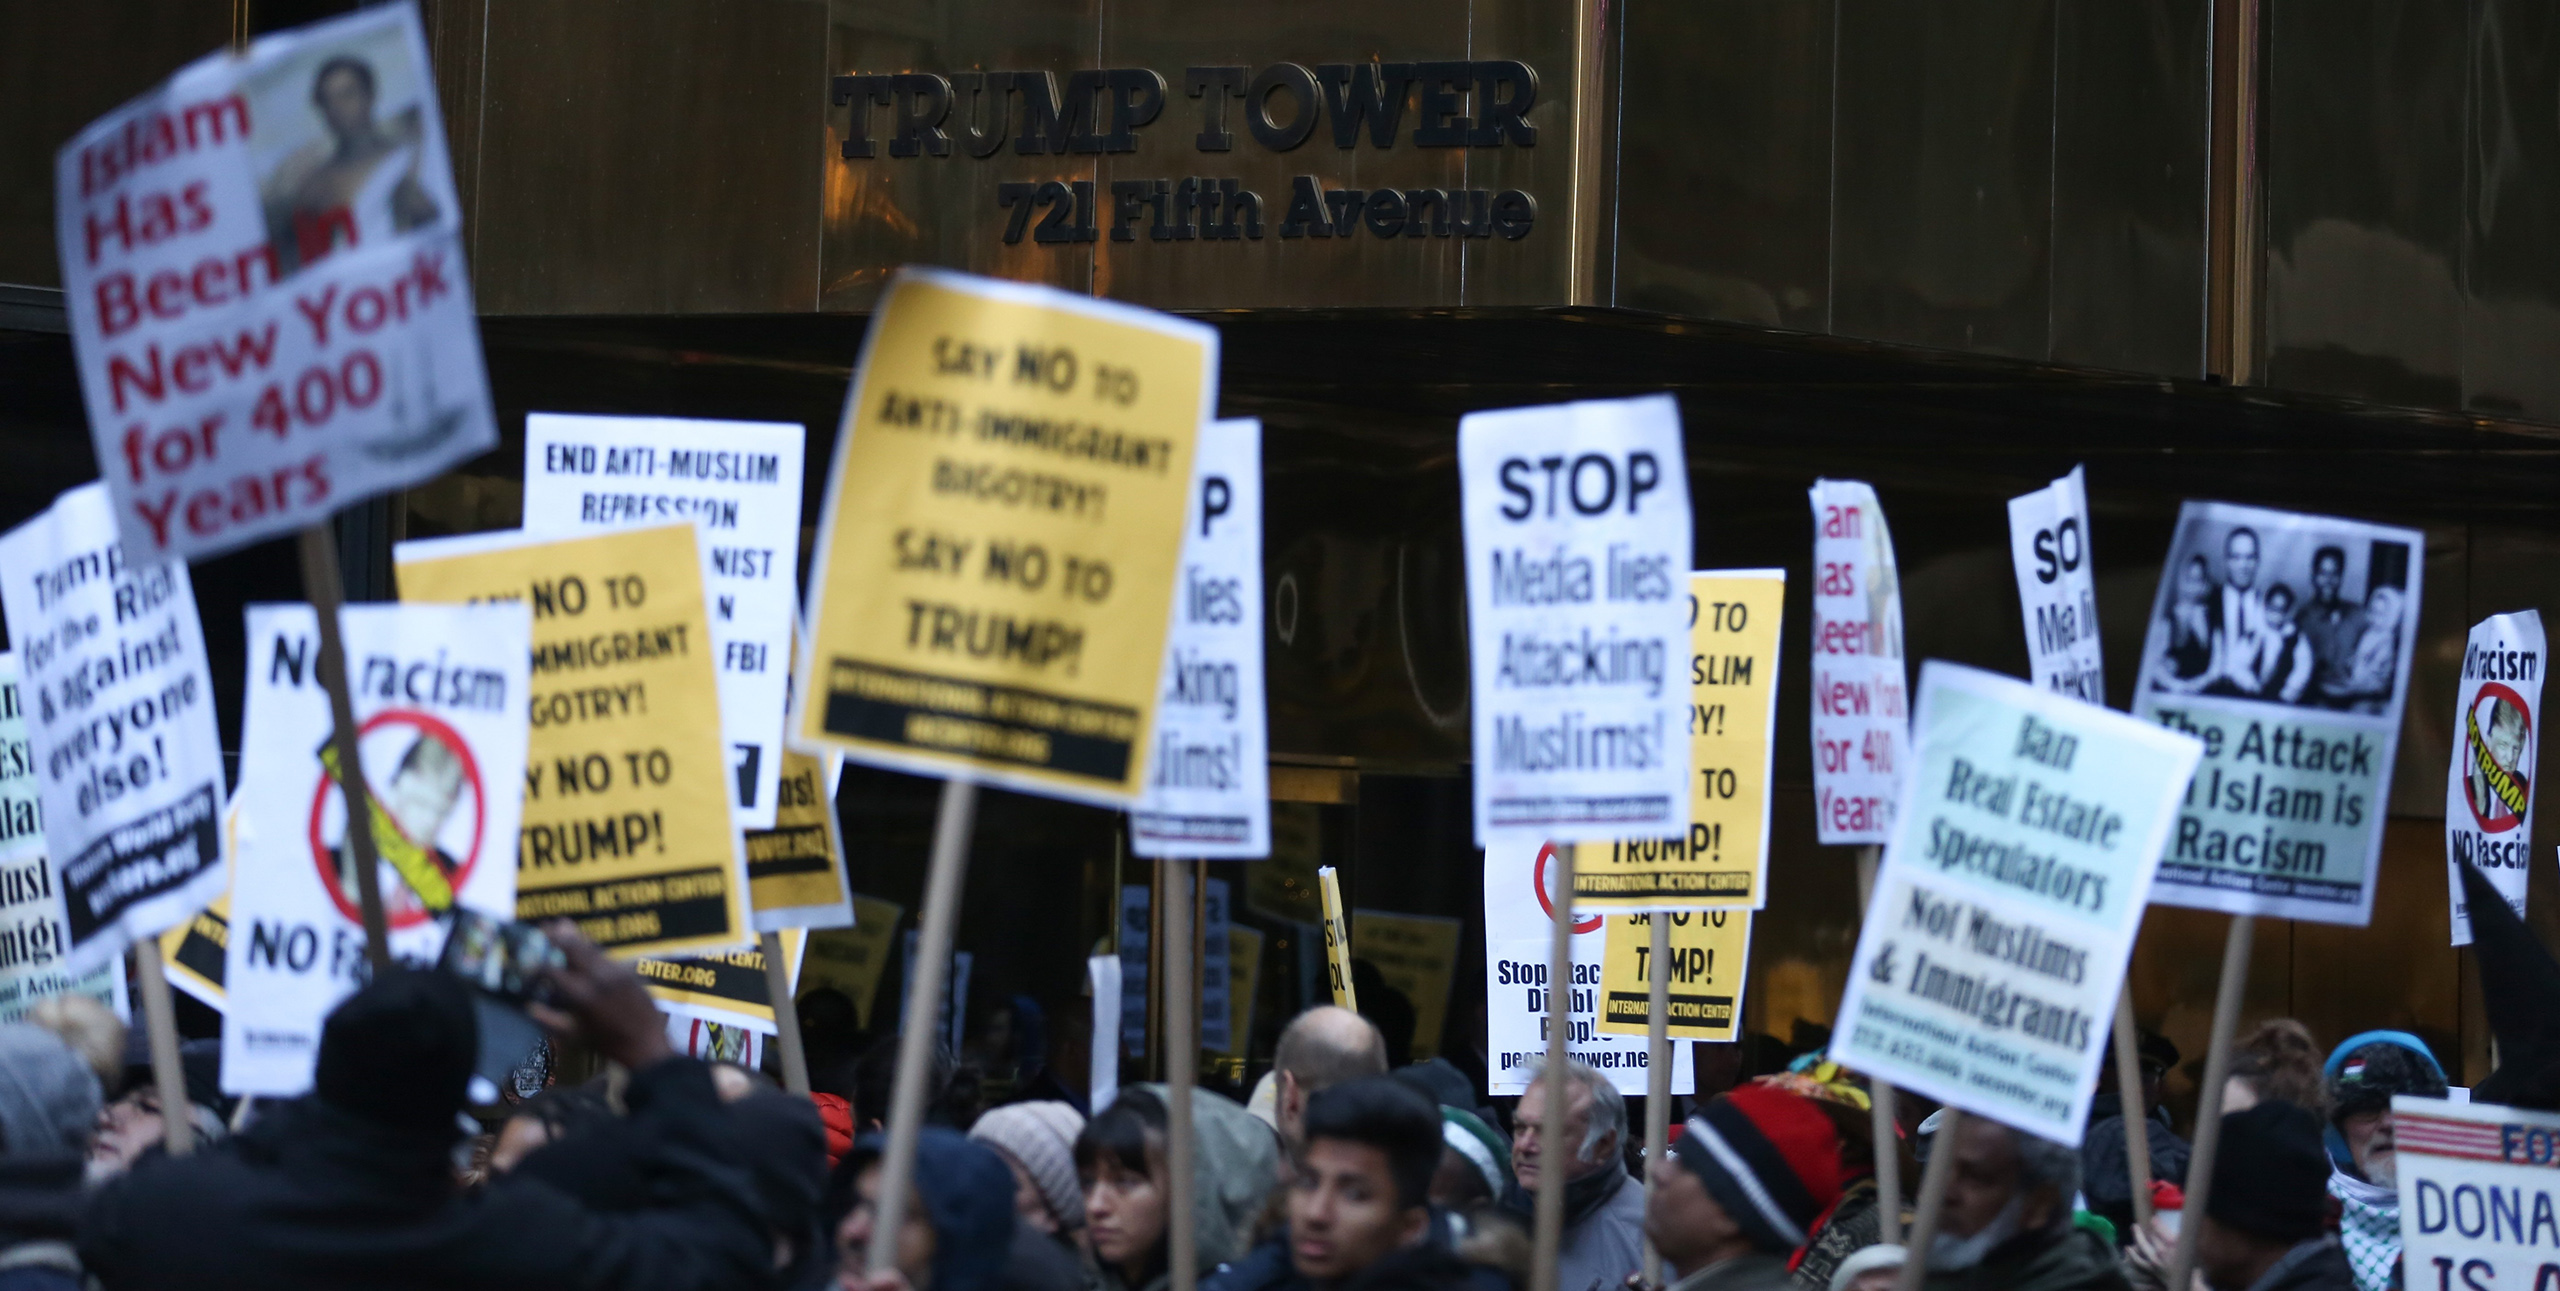 Donald Trump's anti-Muslim hate speech protested in New York